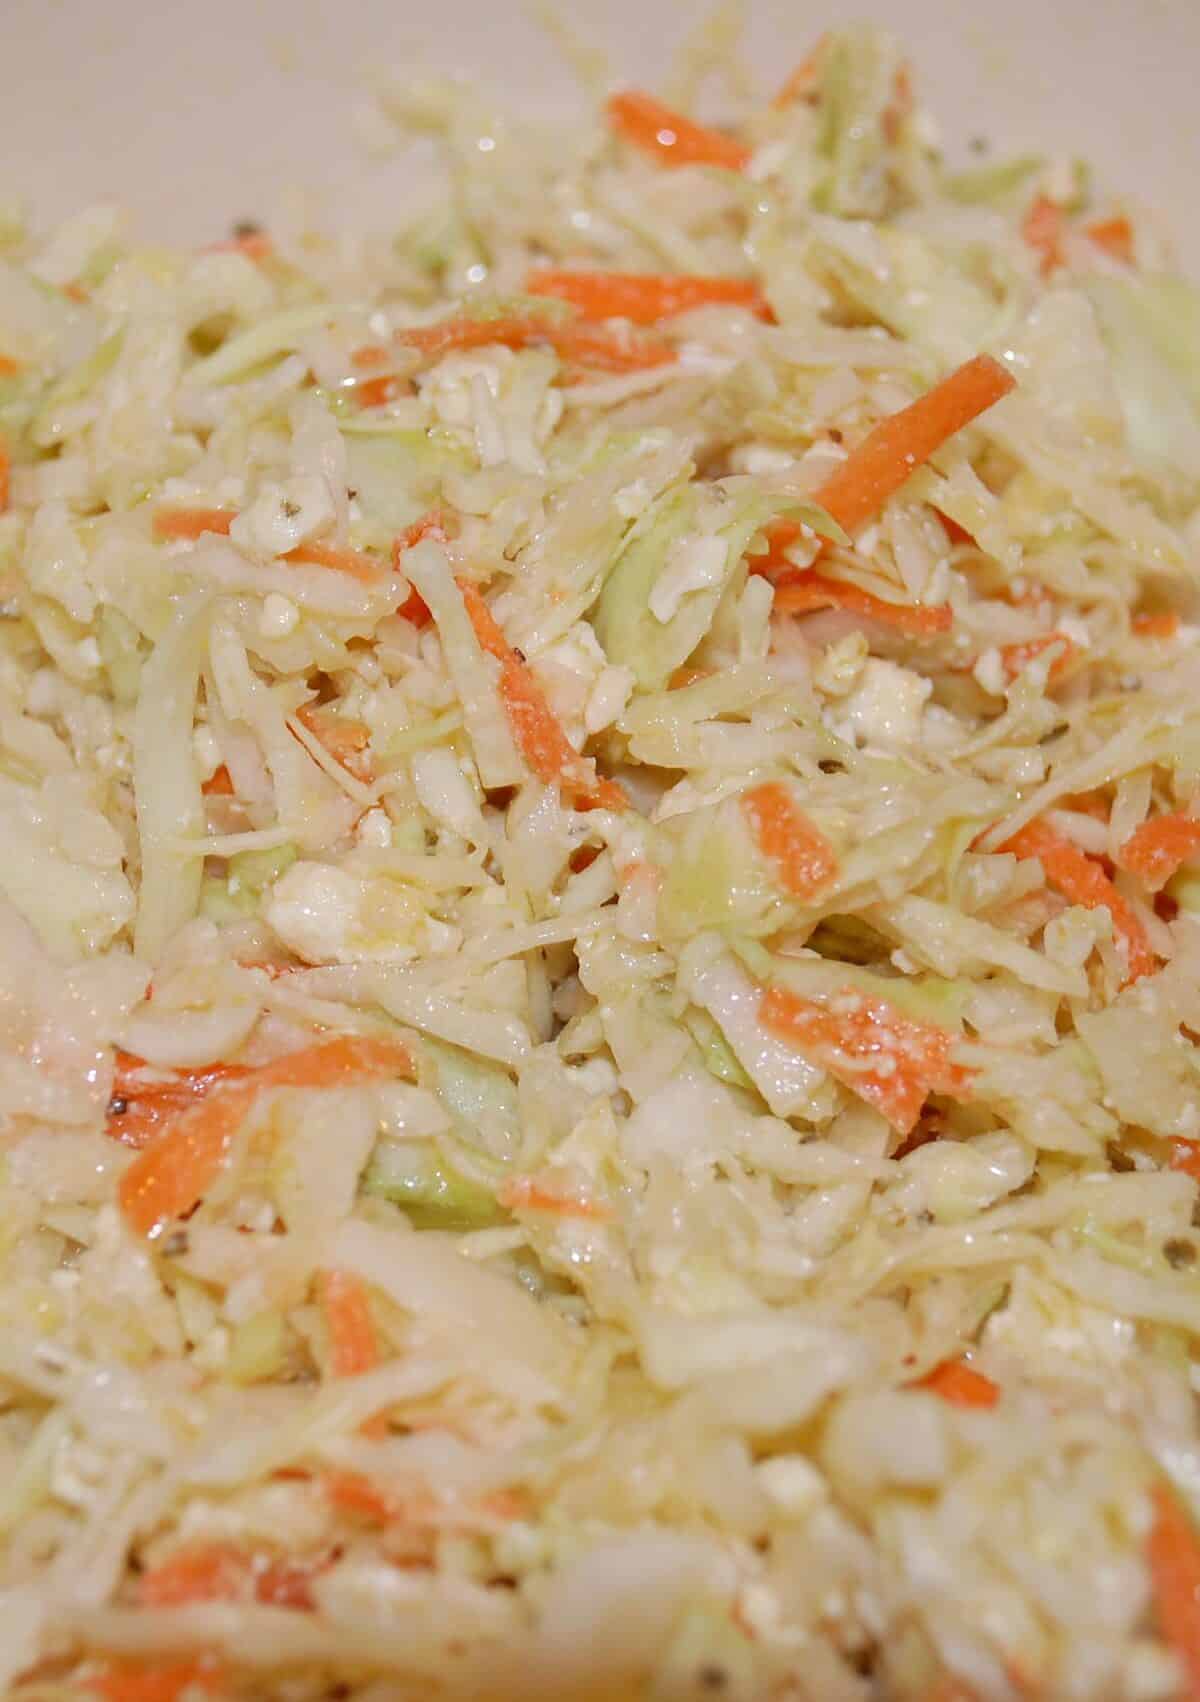  Satisfy your craving for crispy veggies with this Greek Cabbage Slaw.